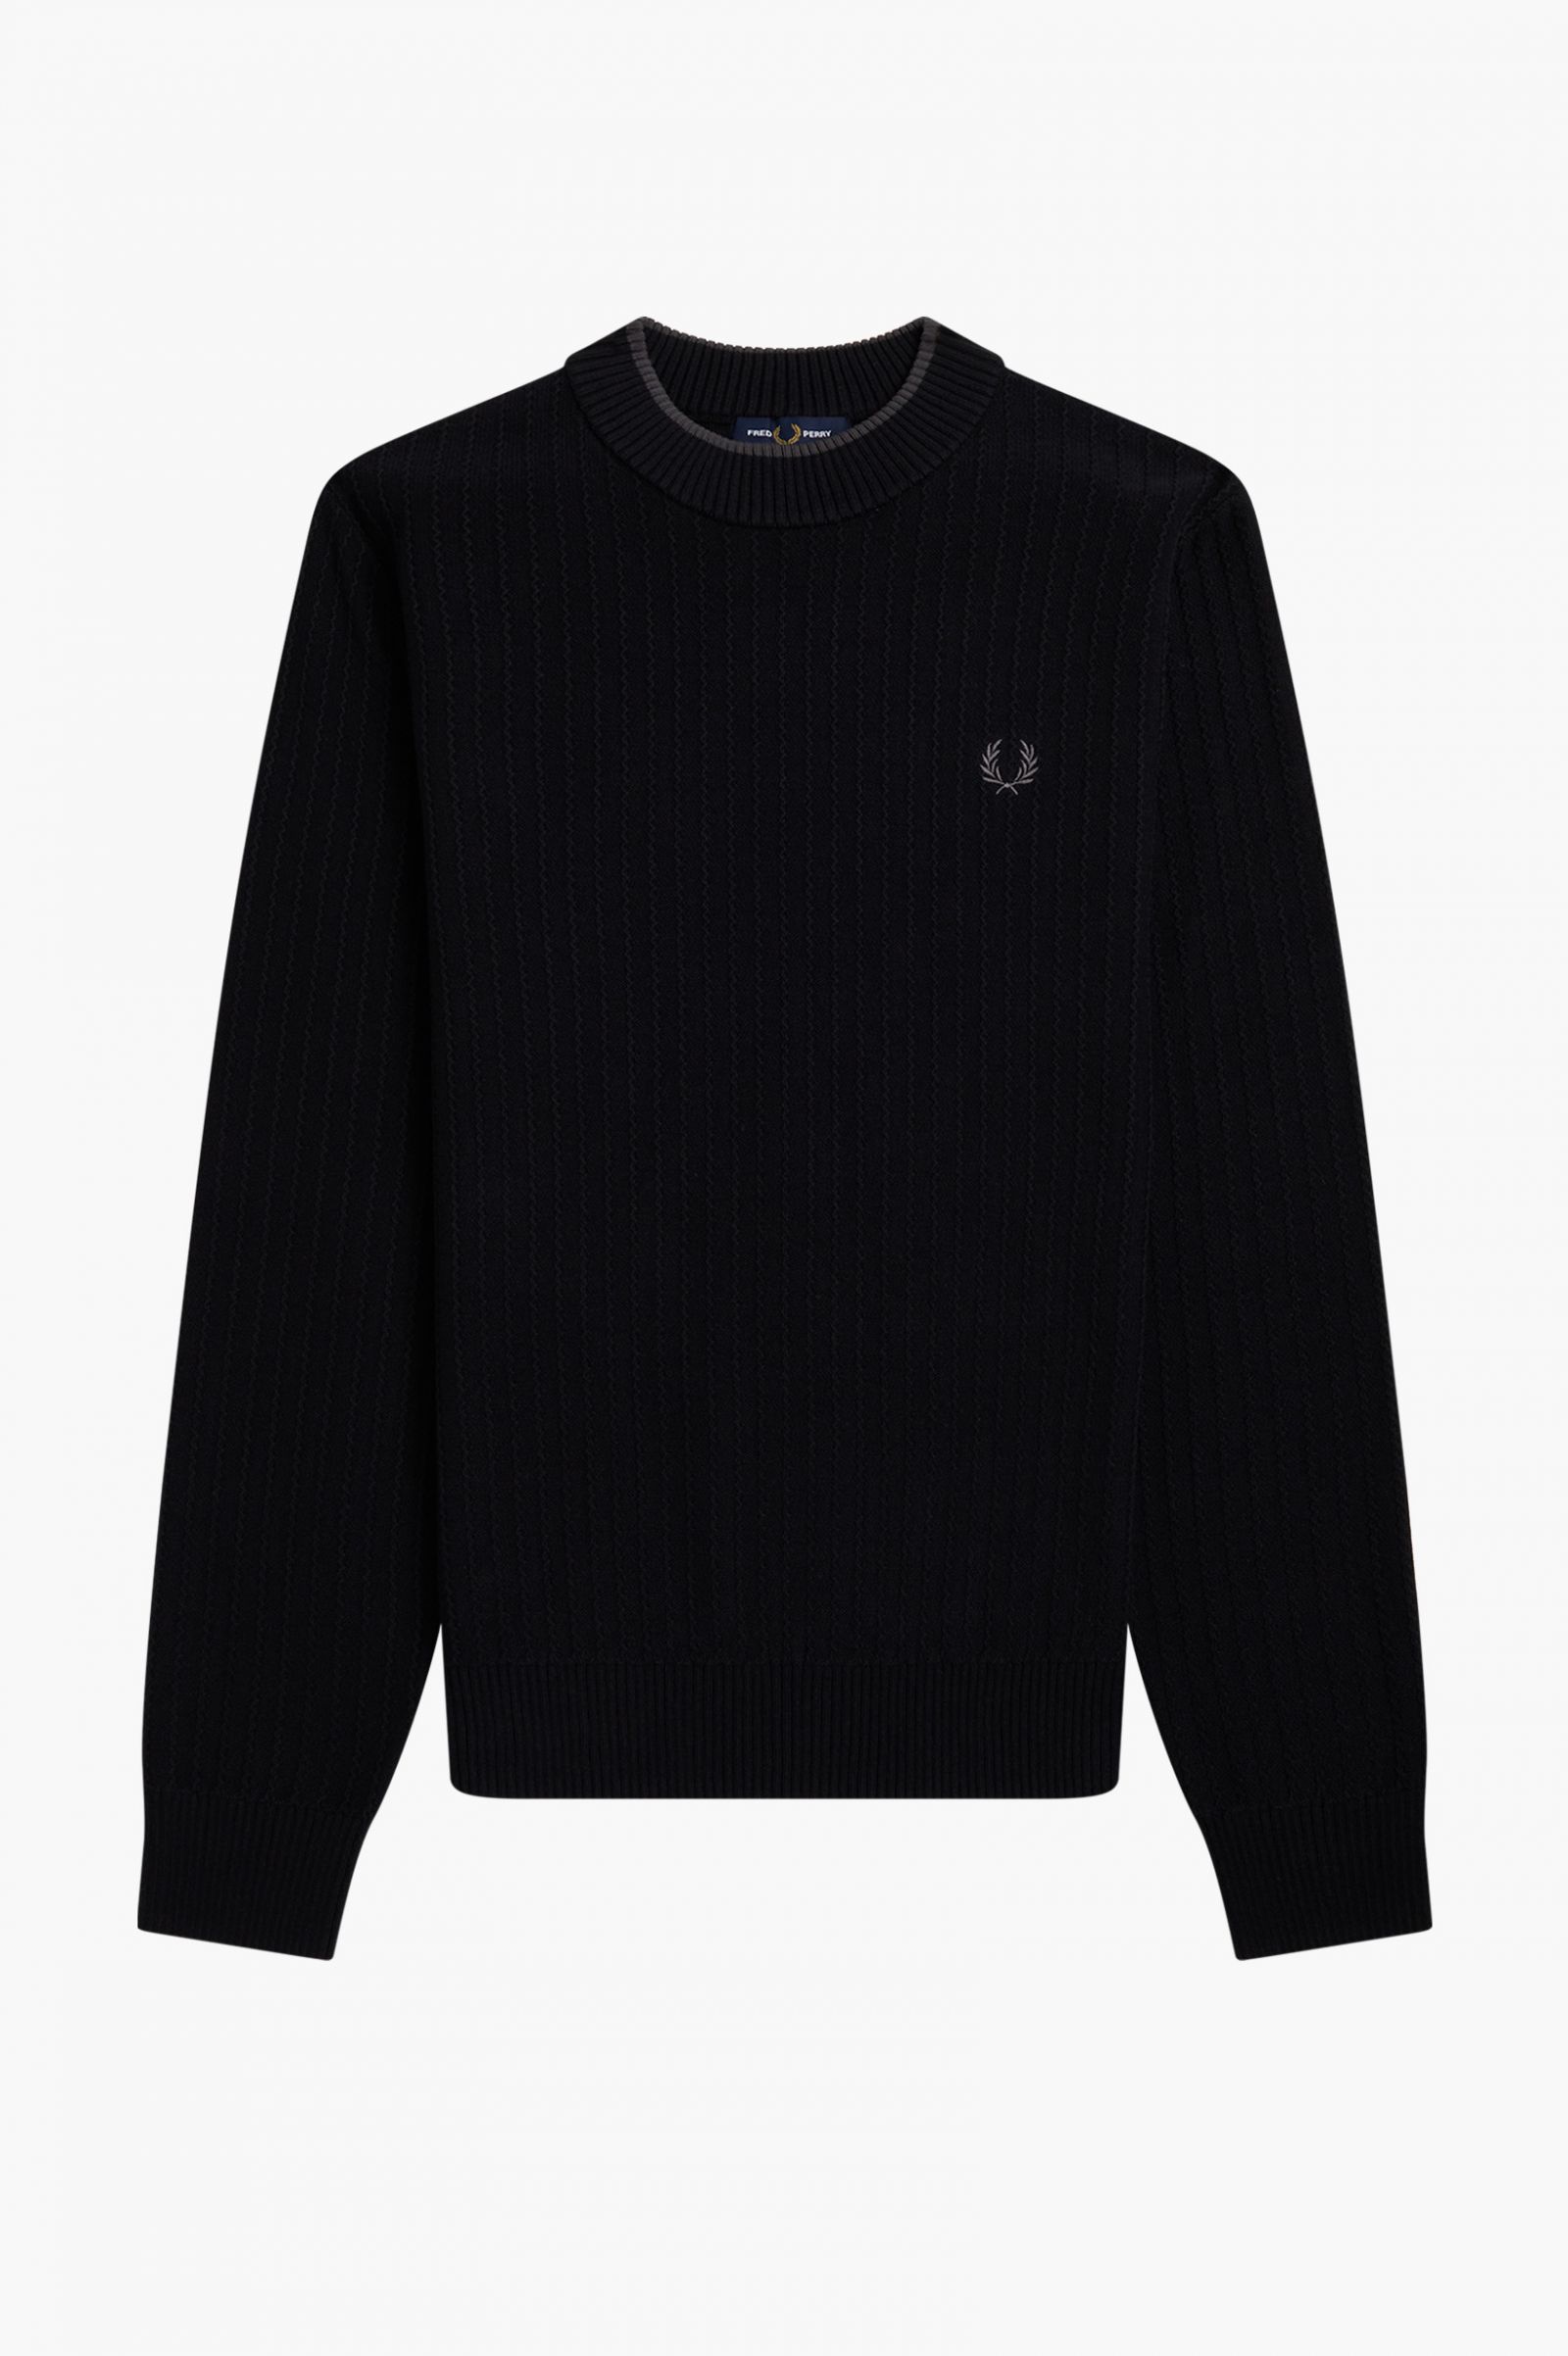 Fred perry Crew Neck Jumper Black